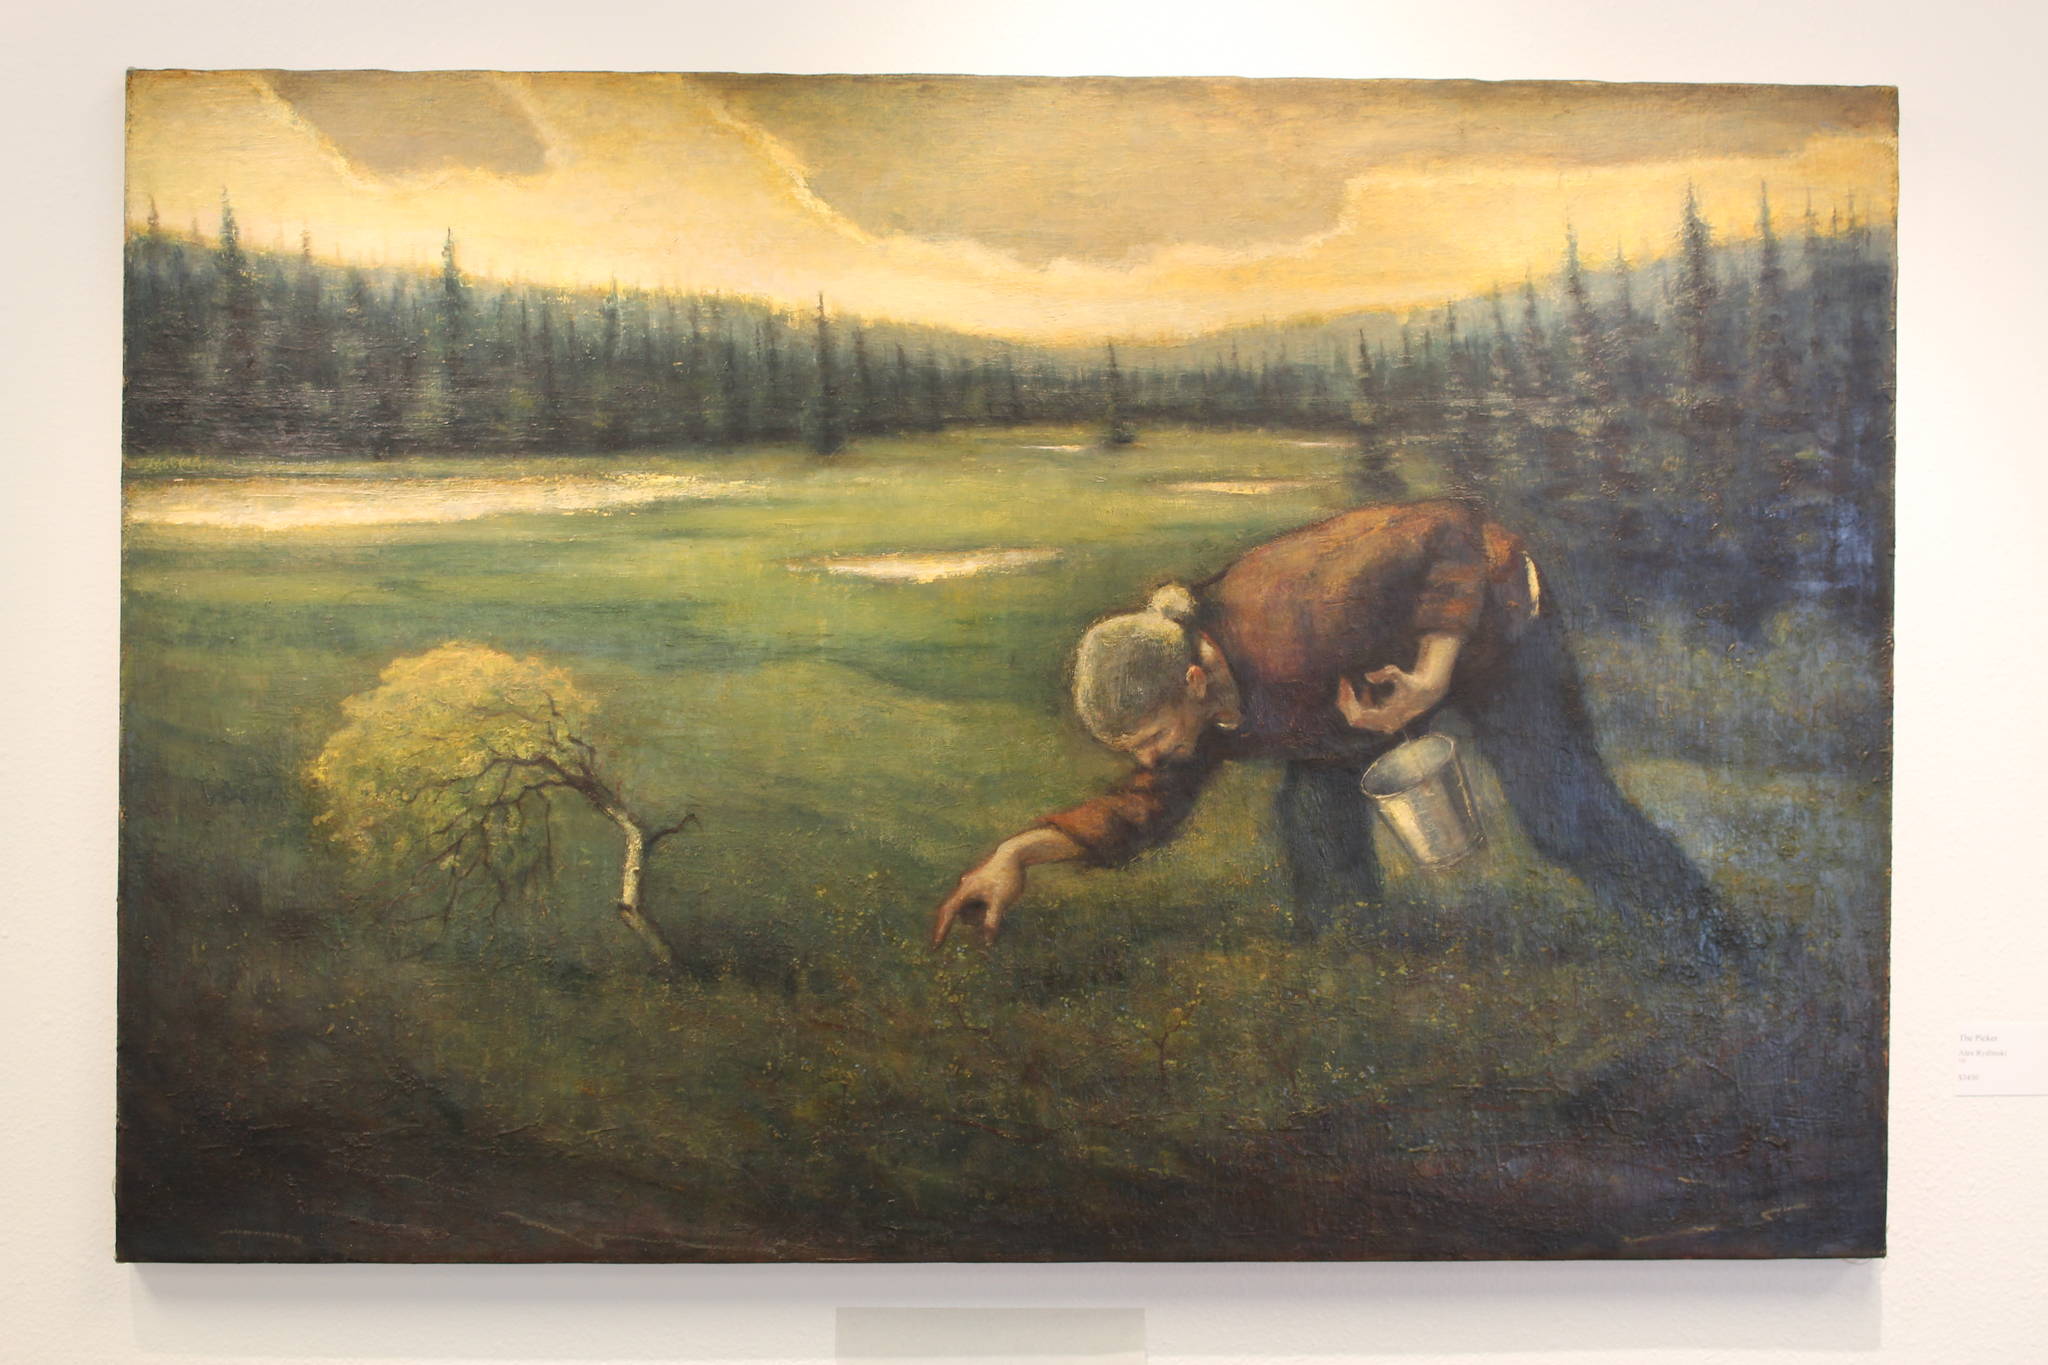 Photos by Brian Mazurek / Peninsula Clarion                                 “The Picker,” an oil painting by local artist Alex Rydinski, is on display at the Kenai Fine Art Center in Kenai on Wednesday. Rydinski’s painting was selected as the Juror’s Choice for the center’s Biannual Juried Show.